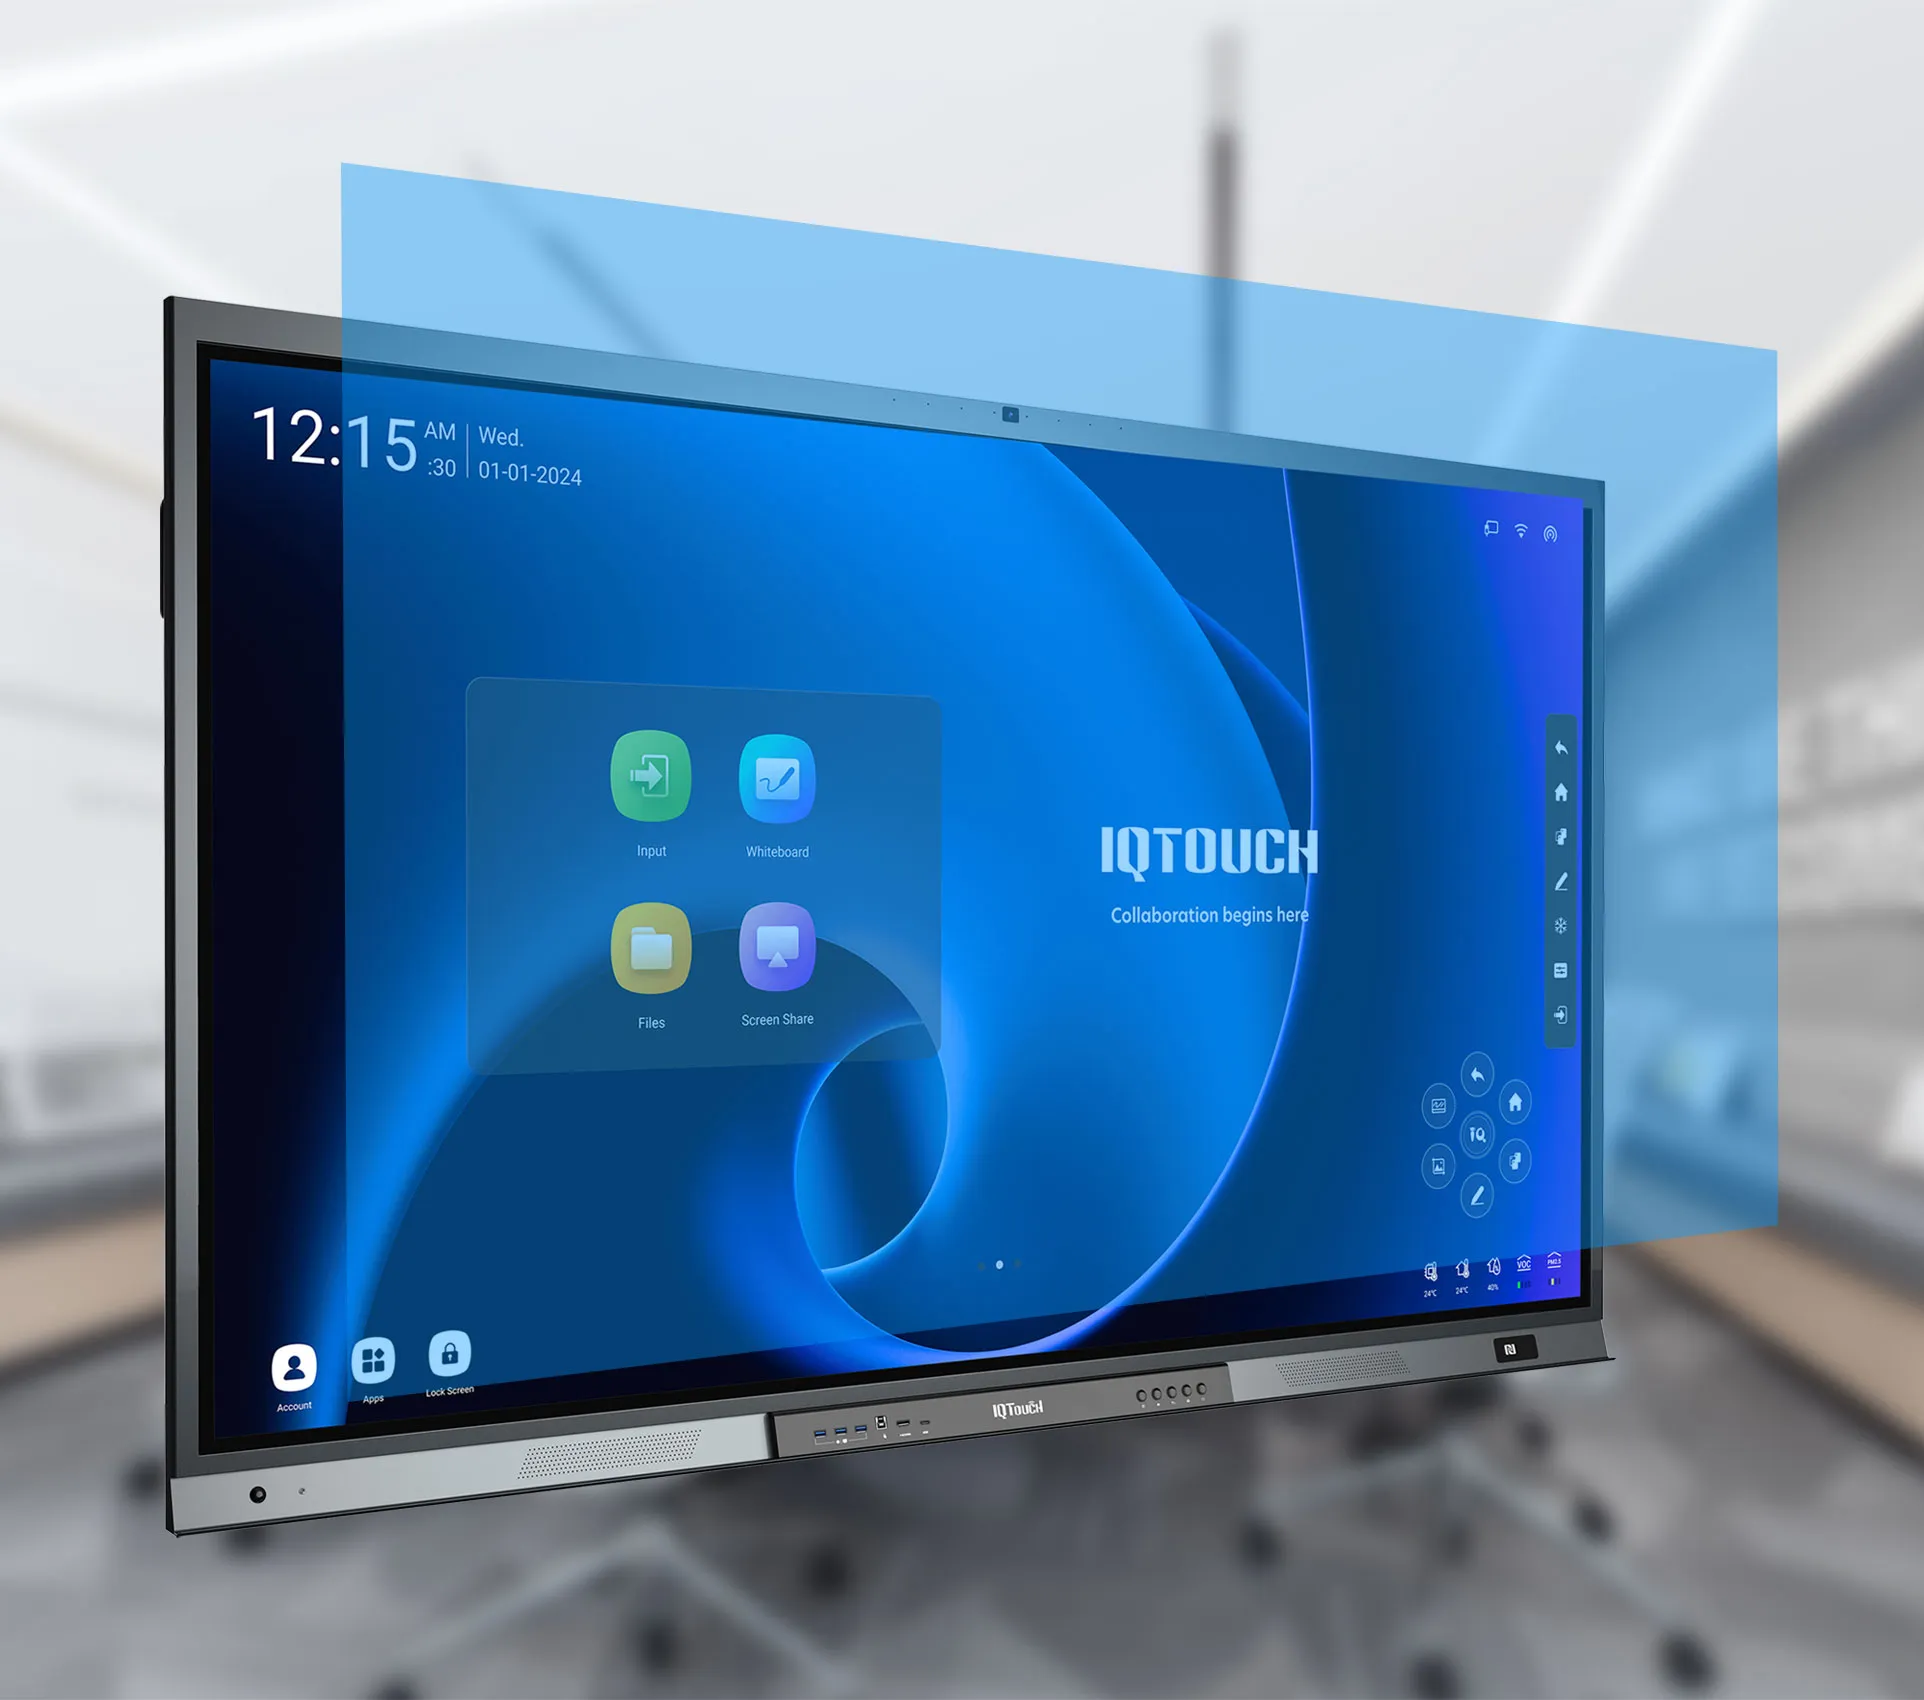 IQTouch QA1300 Pro feature anti-glare screens and low blue light technology